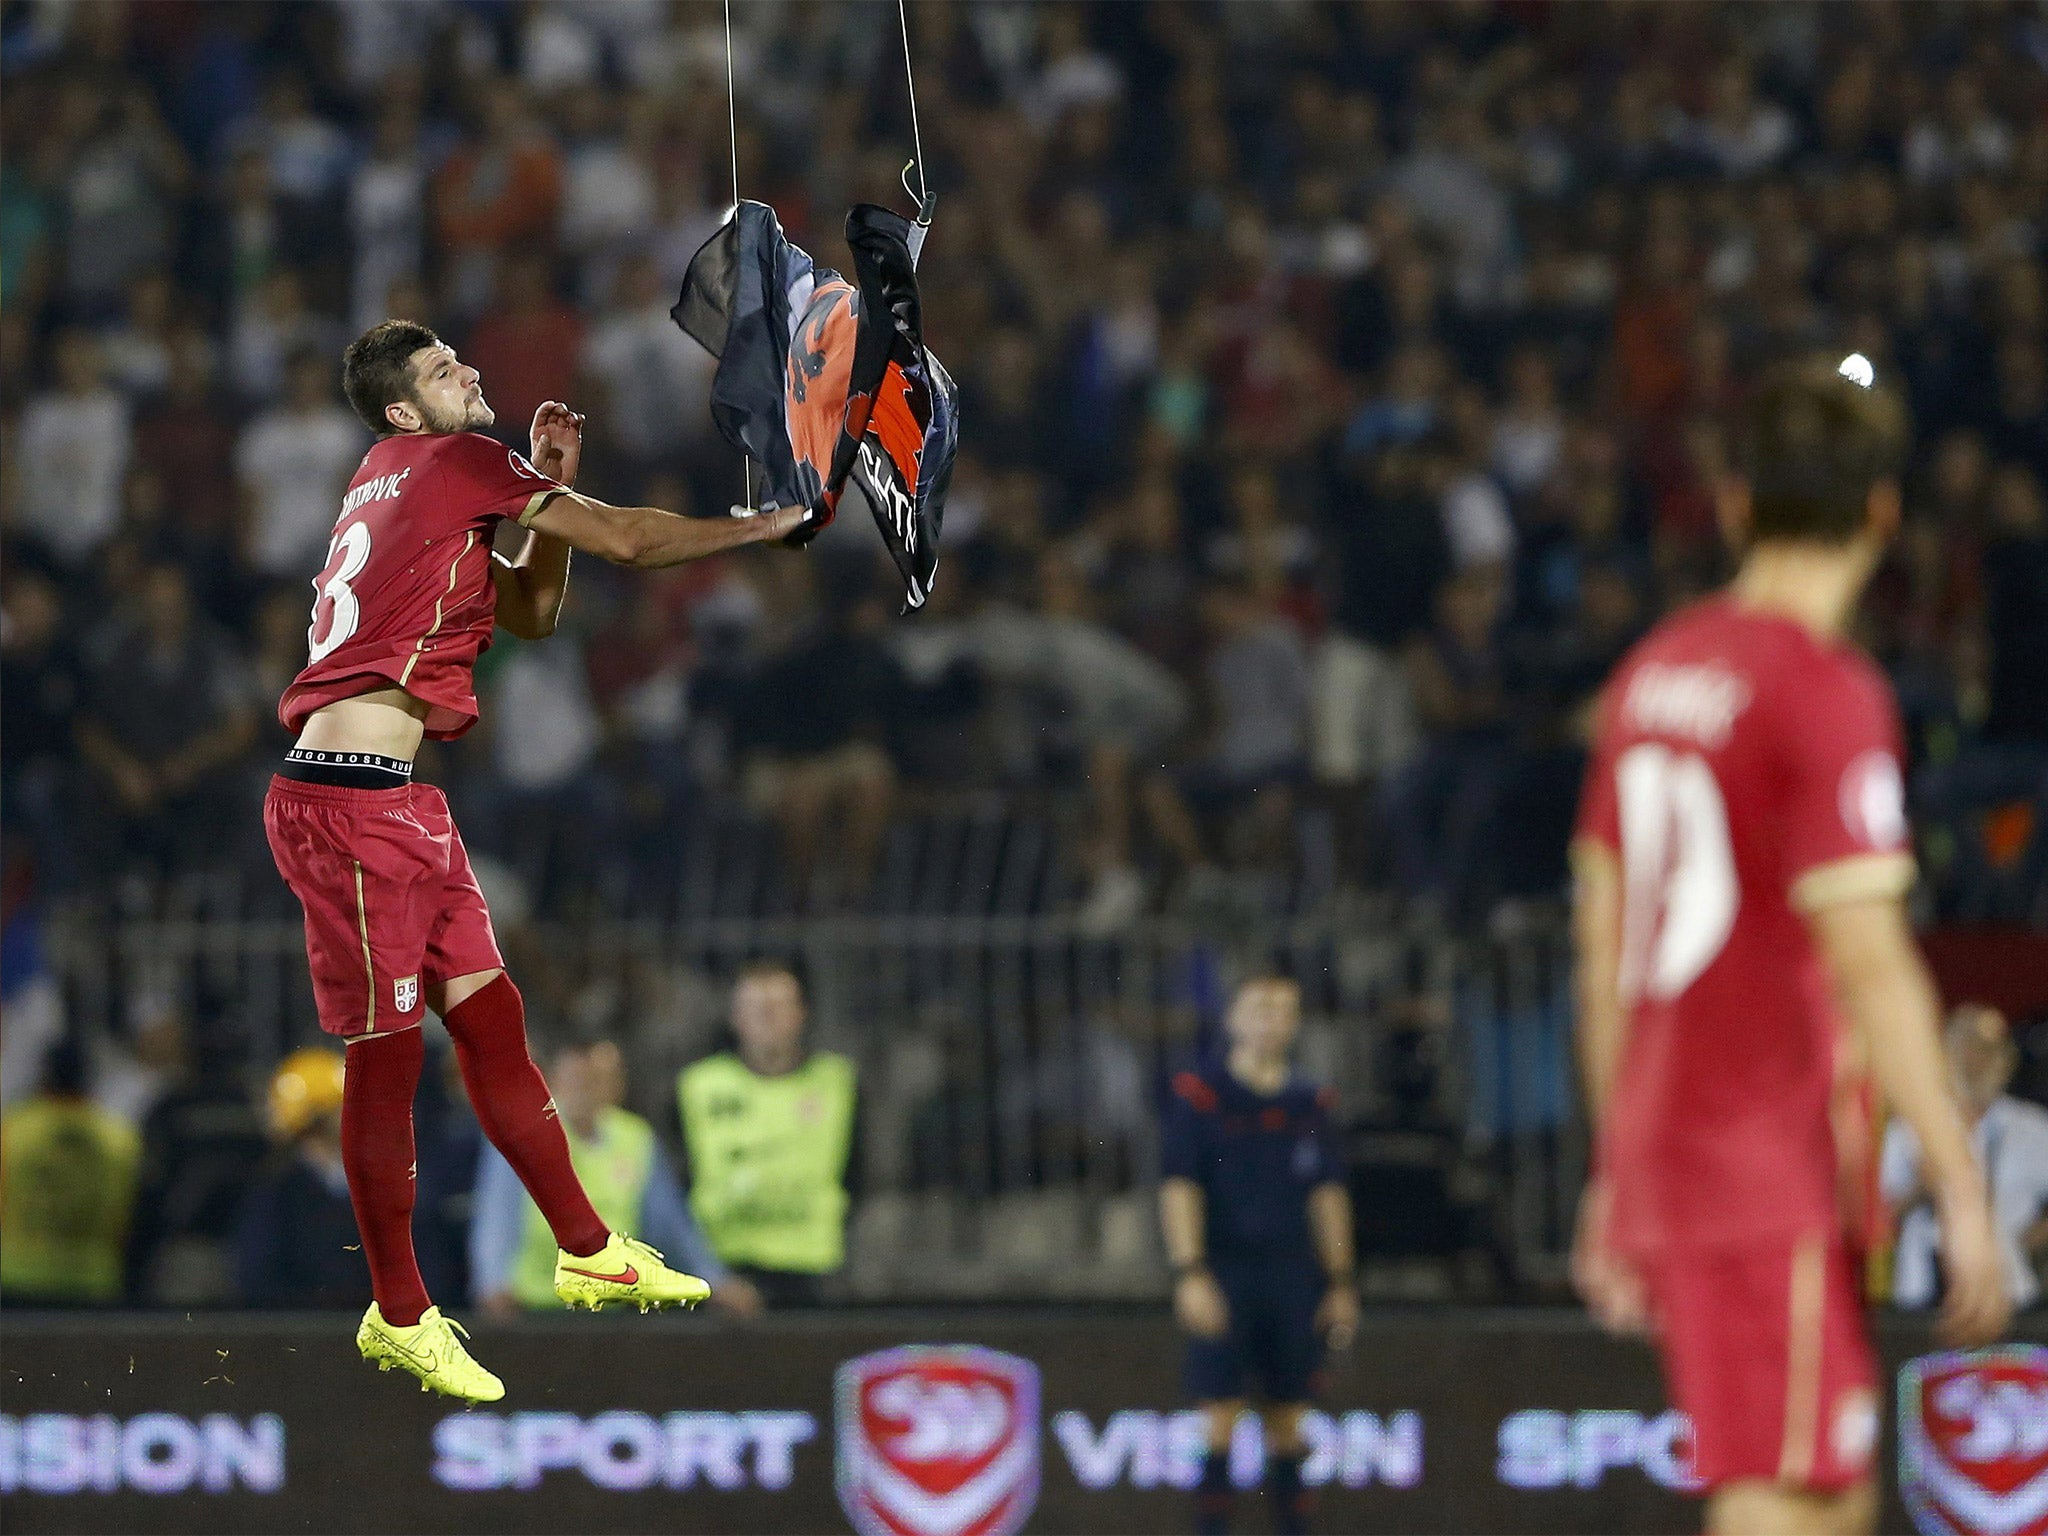 Serbian player Stefan Mitrovic pulls down the flag that was flown in by drone